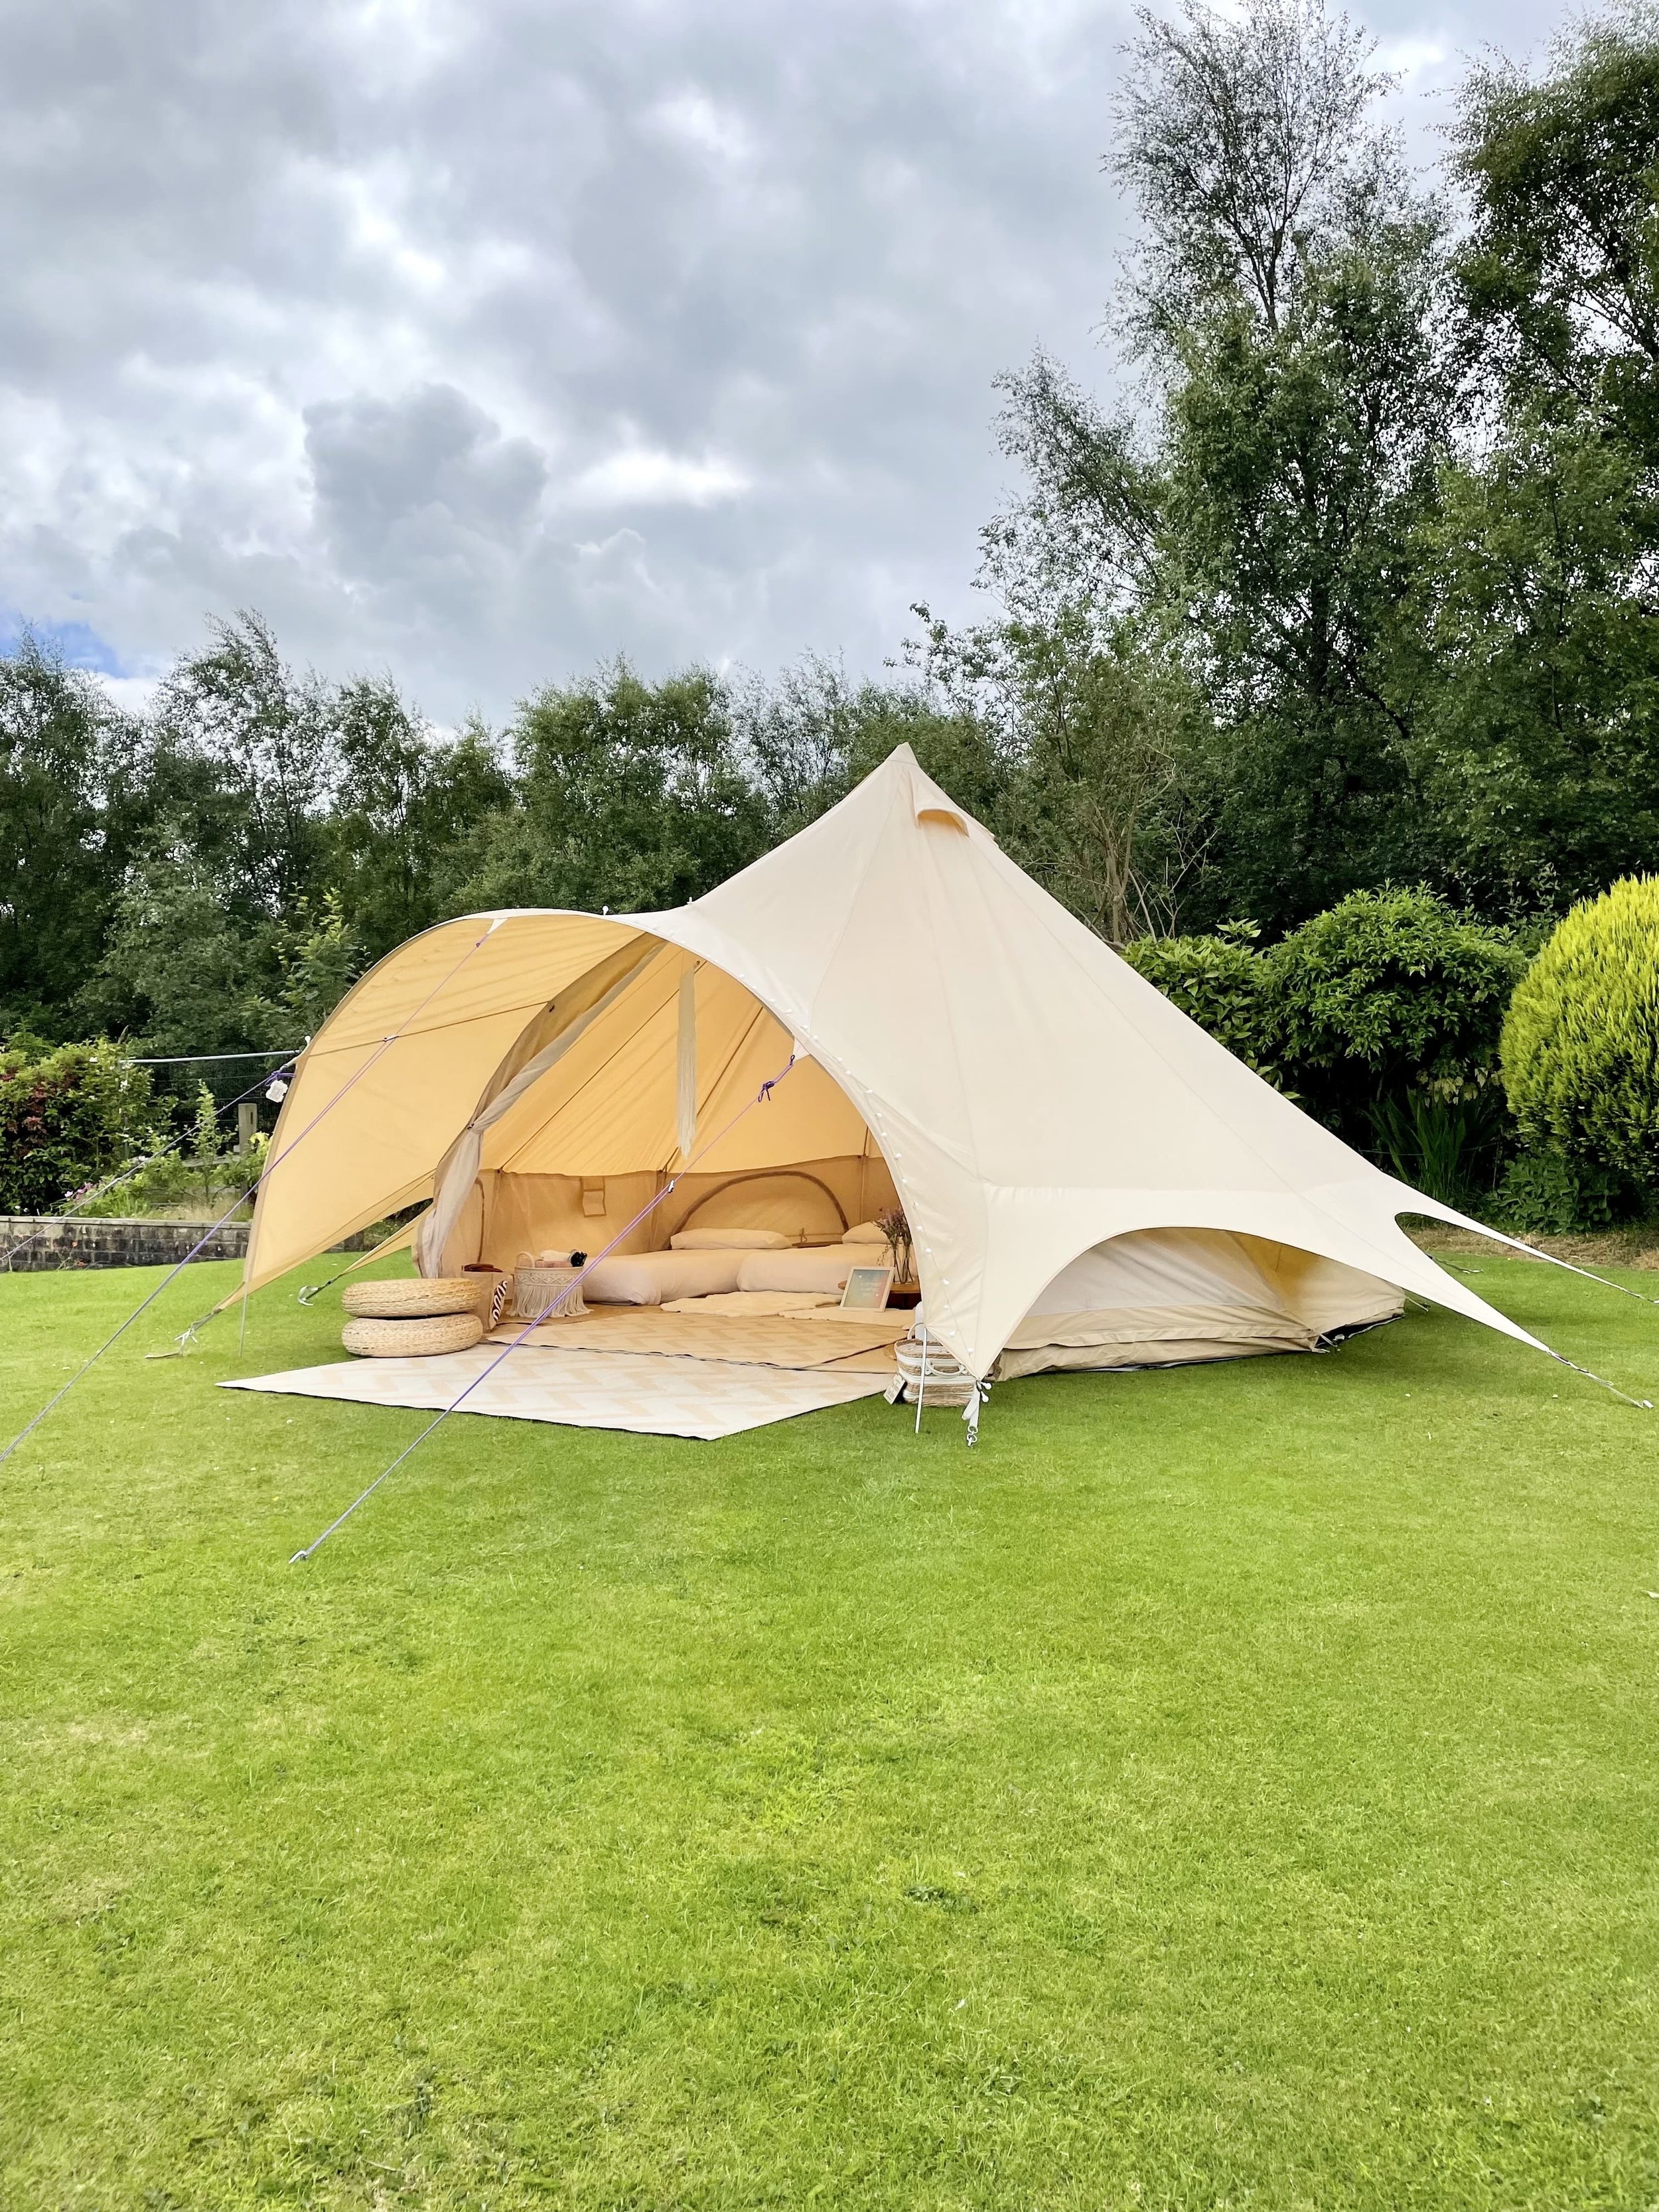 Sleepunder Yorkshire- Sleepover Party Tents in Greater Manchester